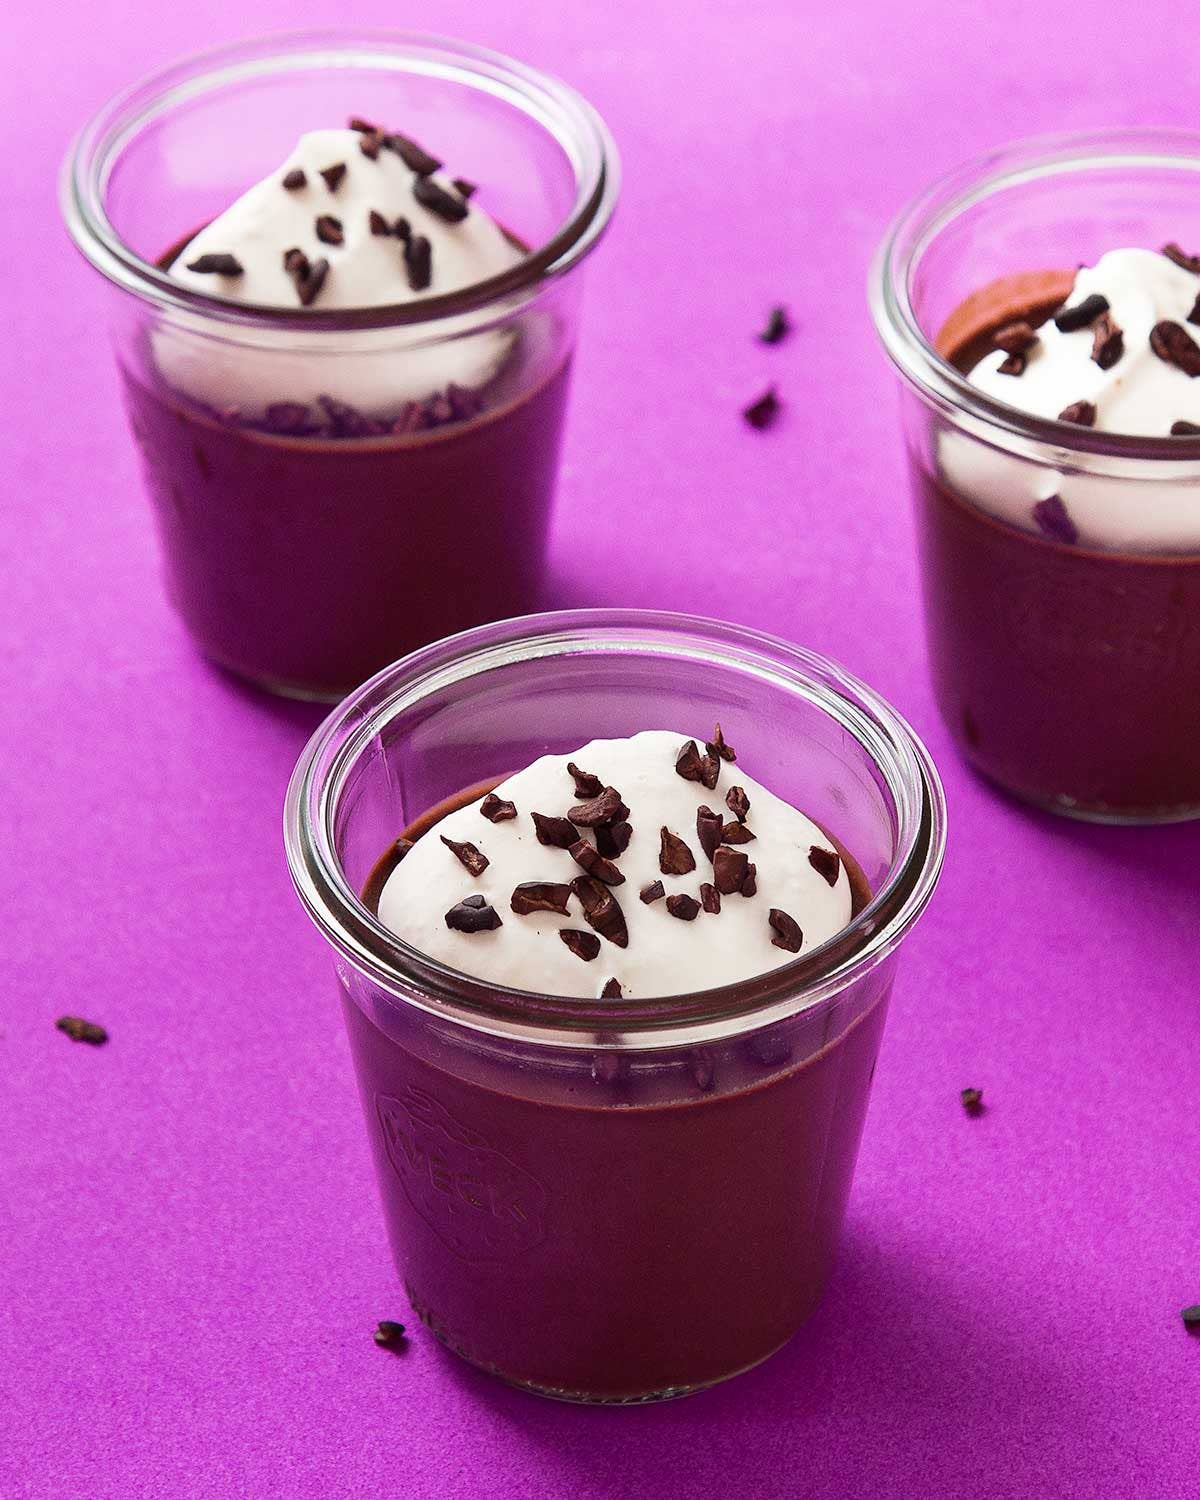 The Best Thing to Do With Old Bananas: Make Chocolate Pudding